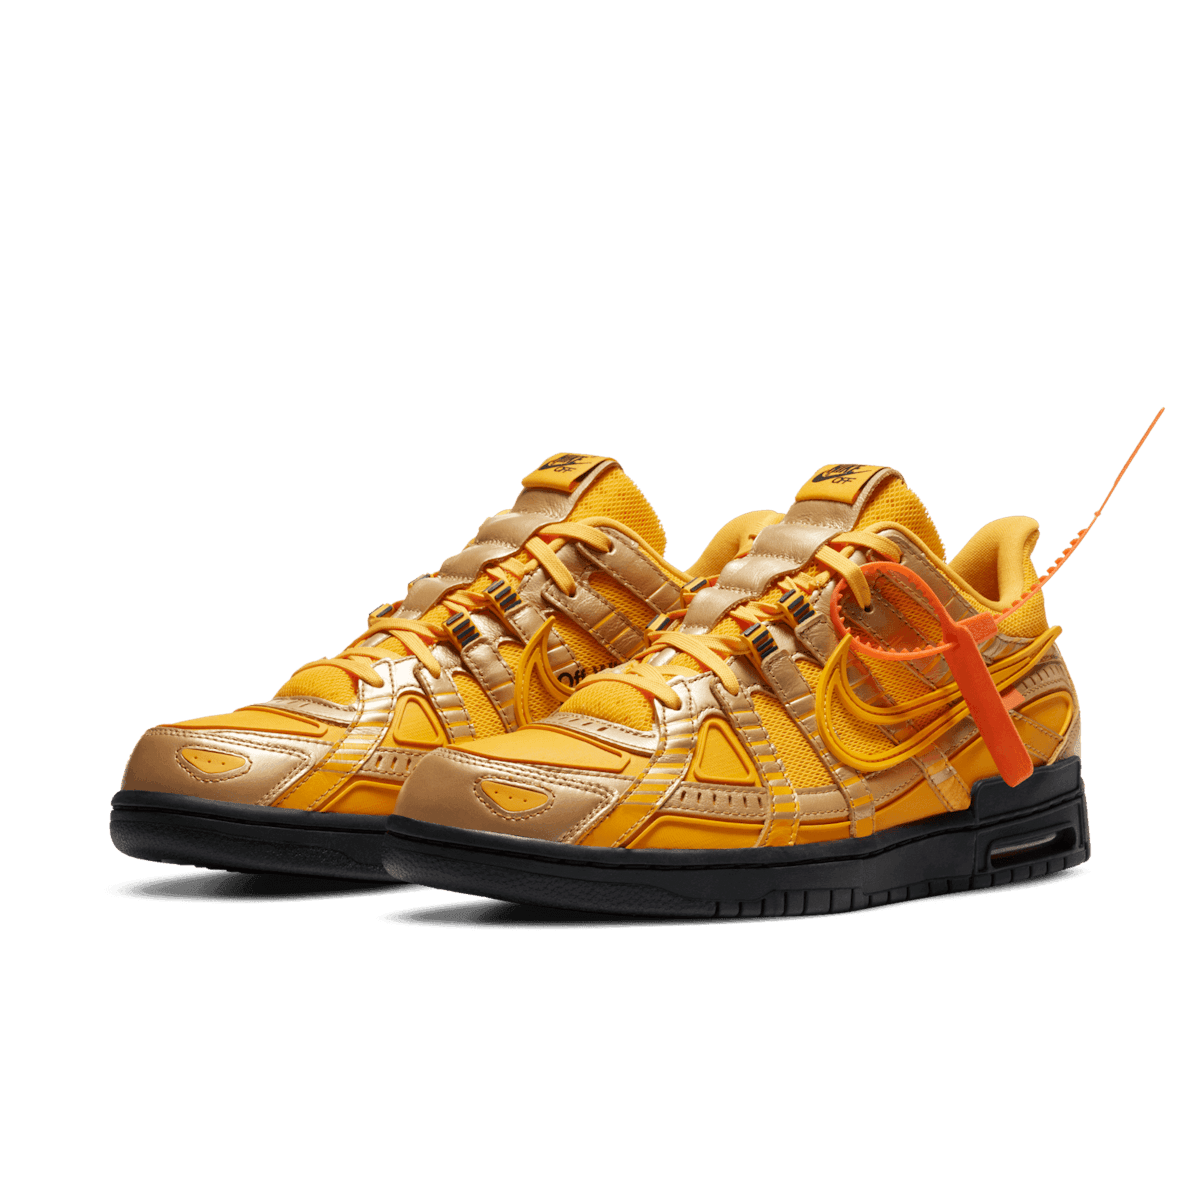 Nike Air Rubber Dunk Off-White University Gold Angle 2